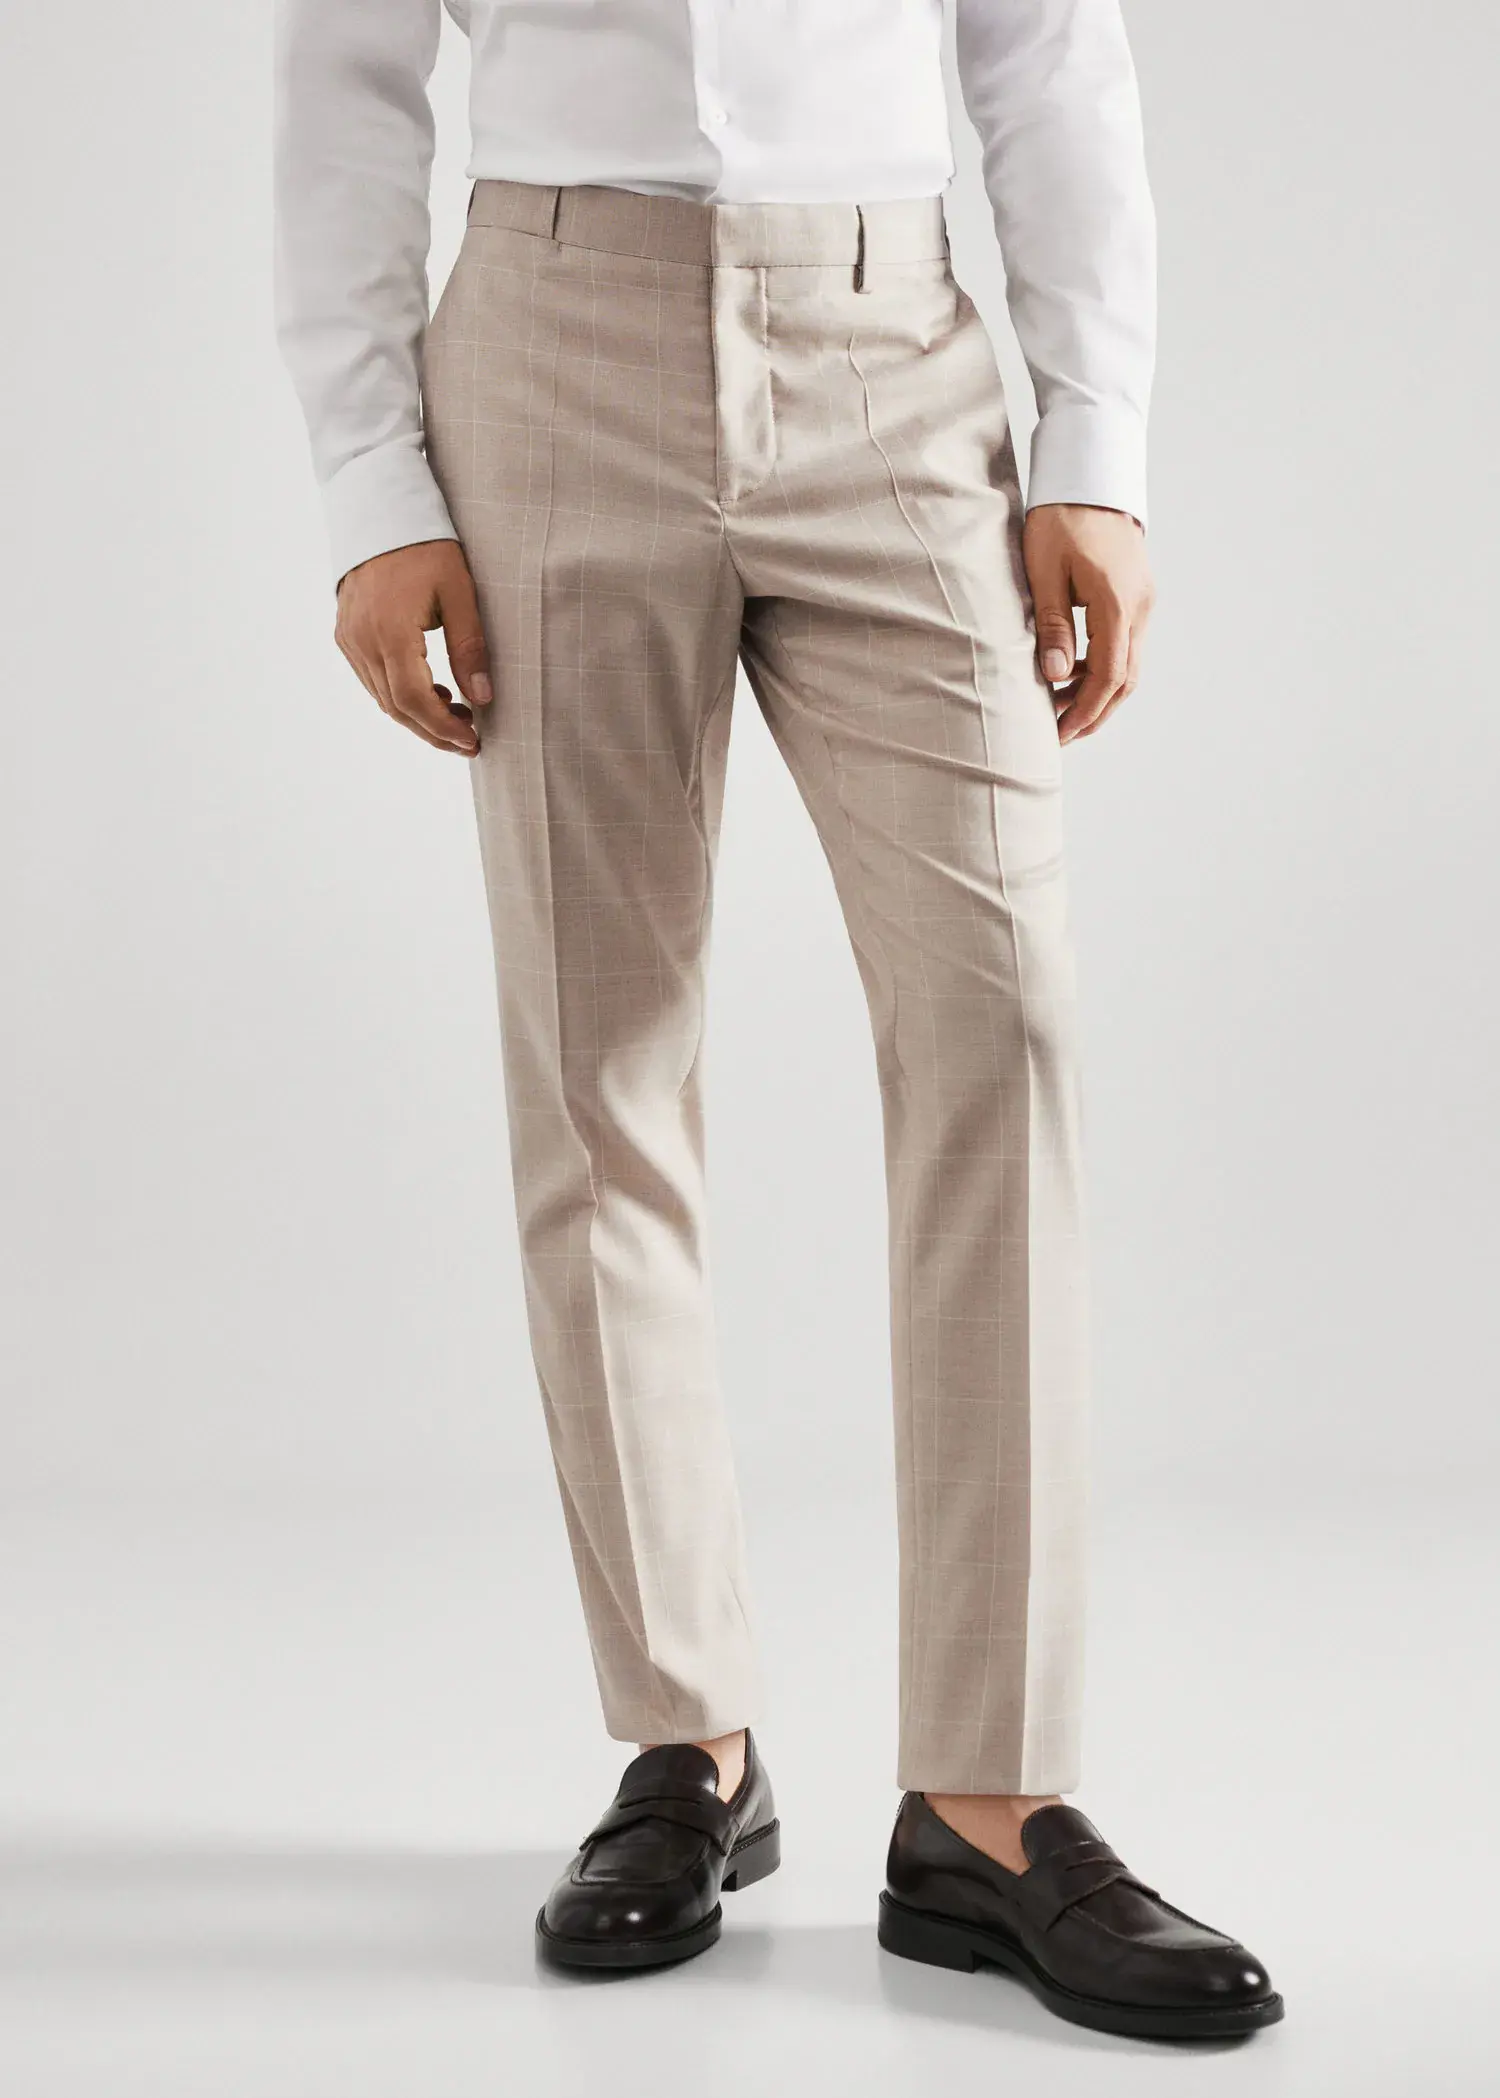 Mango Super slim-fit Tailored check pants. a man wearing a suit and tie. 